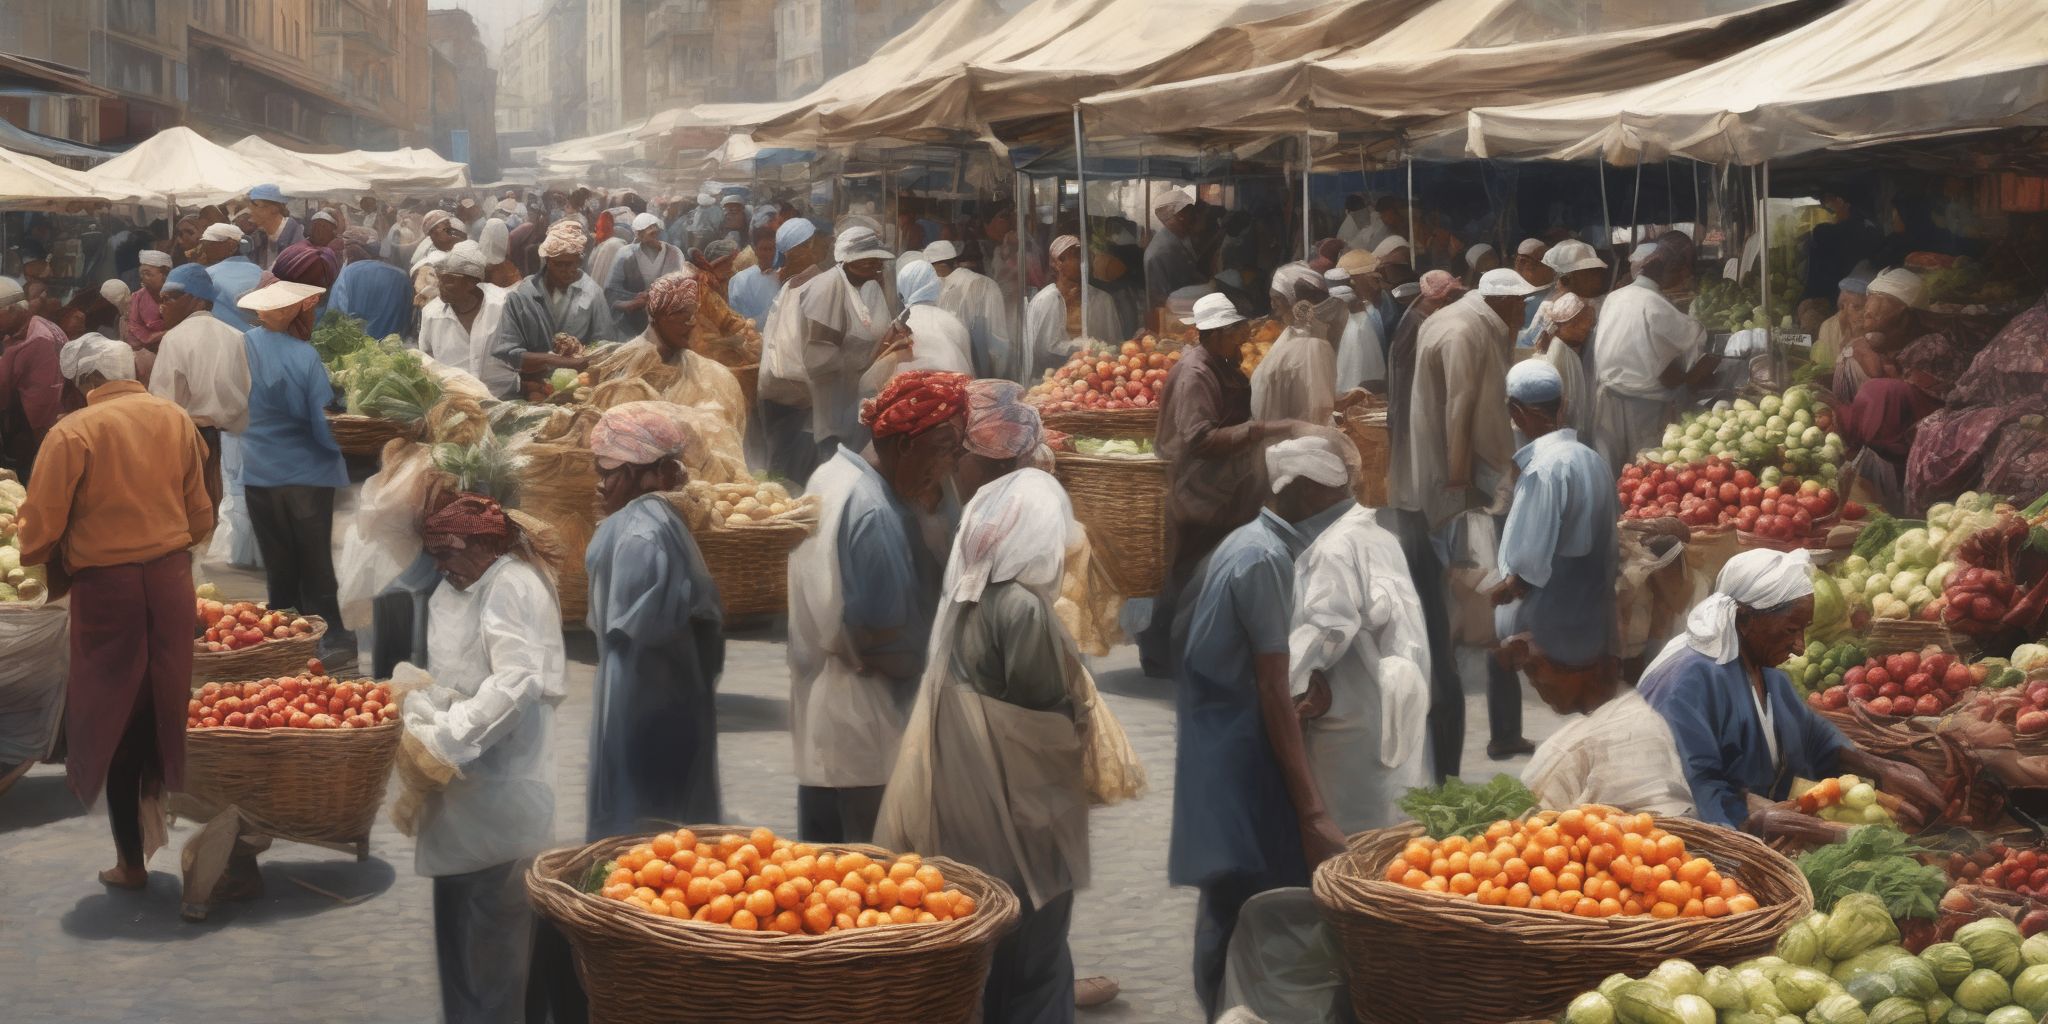 Market participants  in realistic, photographic style